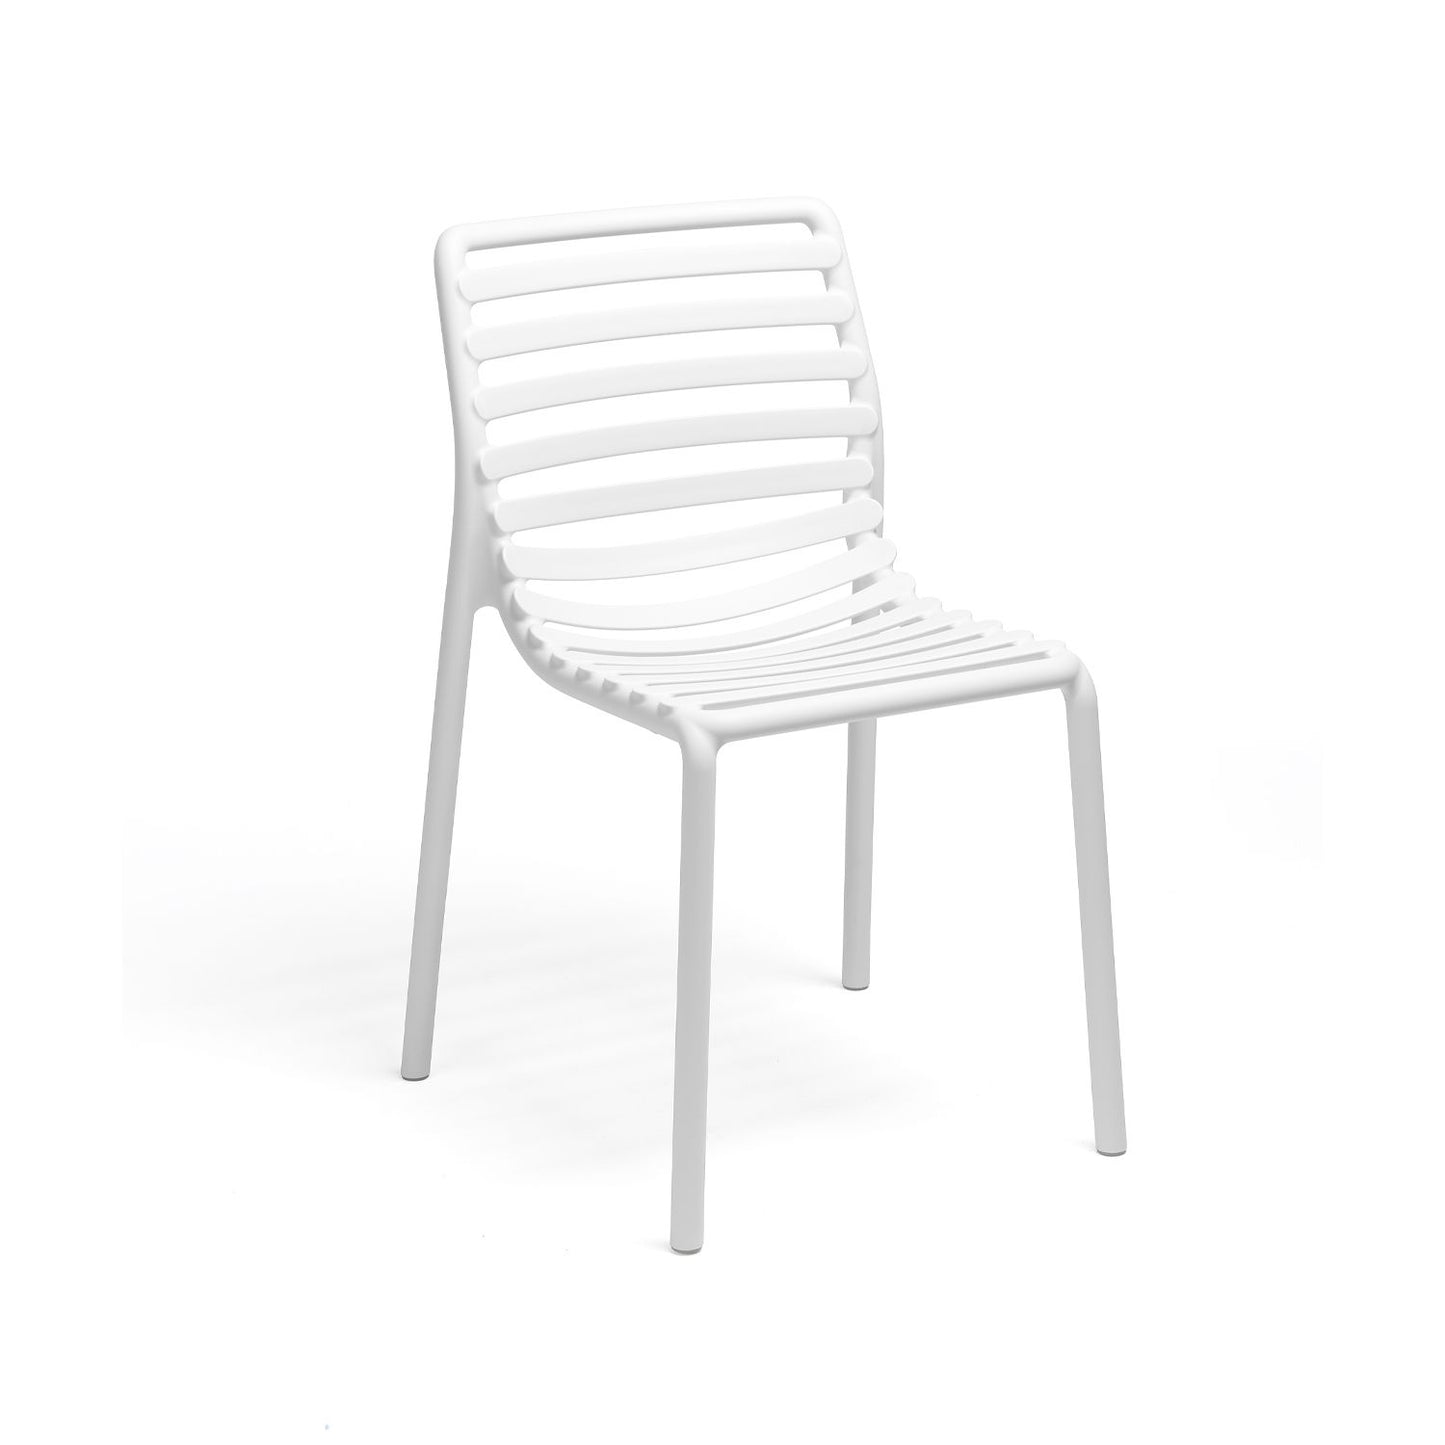 Doga Armless Chair By Nardi - Set Of 6 - White